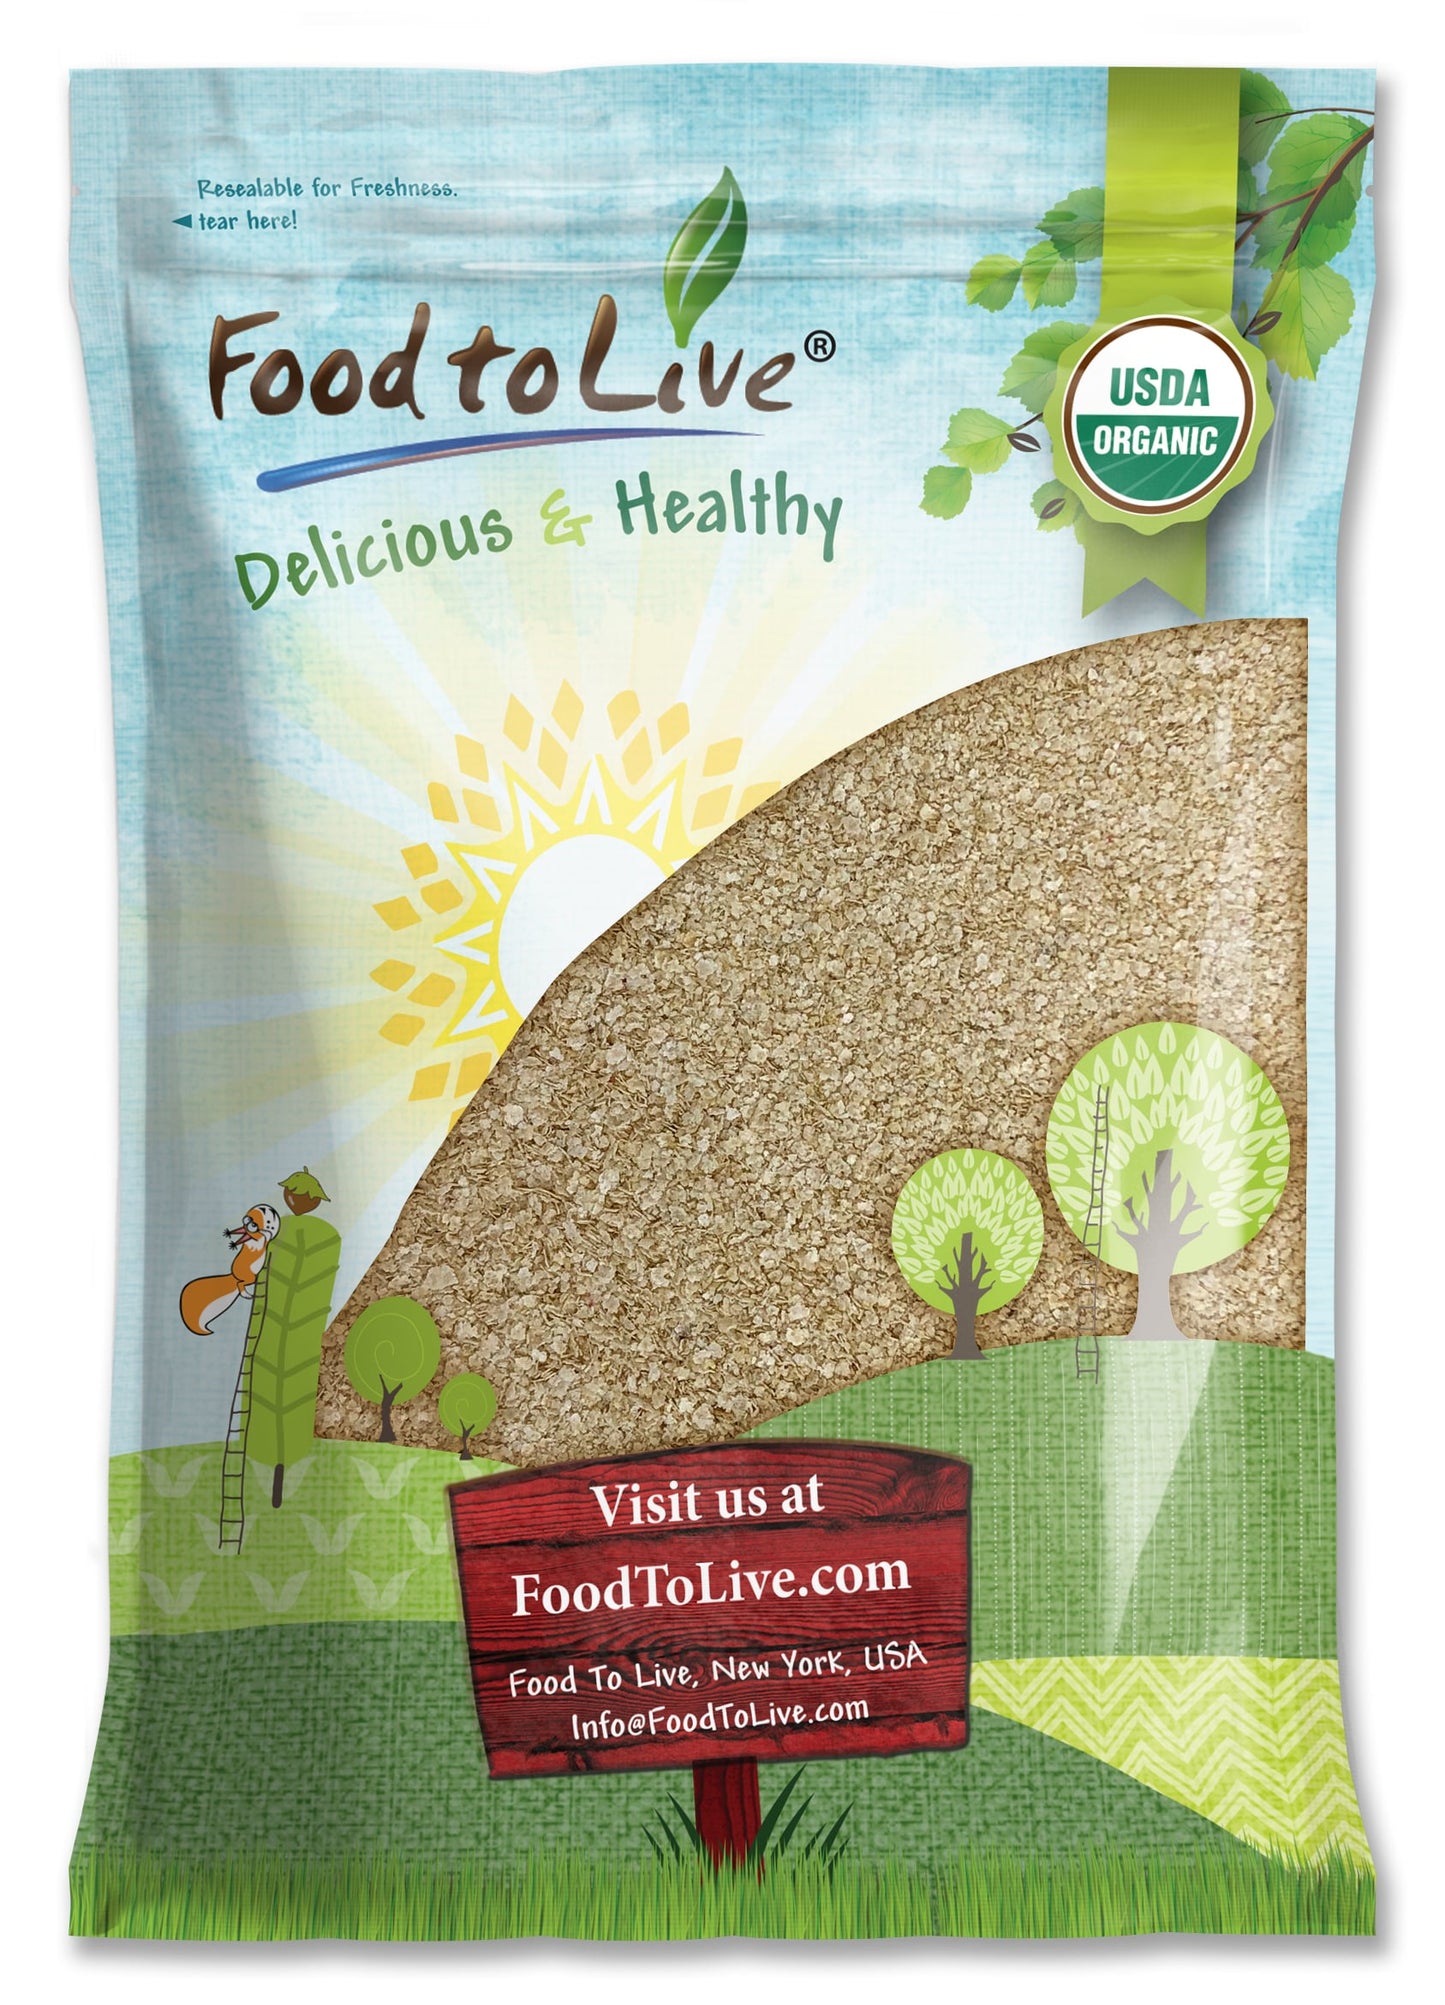 Organic Amaranth Flakes - Non-GMO Pressed Amaranth Seeds, Vegan, Kosher, Bulk, High in Dietary Fiber, Protein, and Selenium - by Food to Live